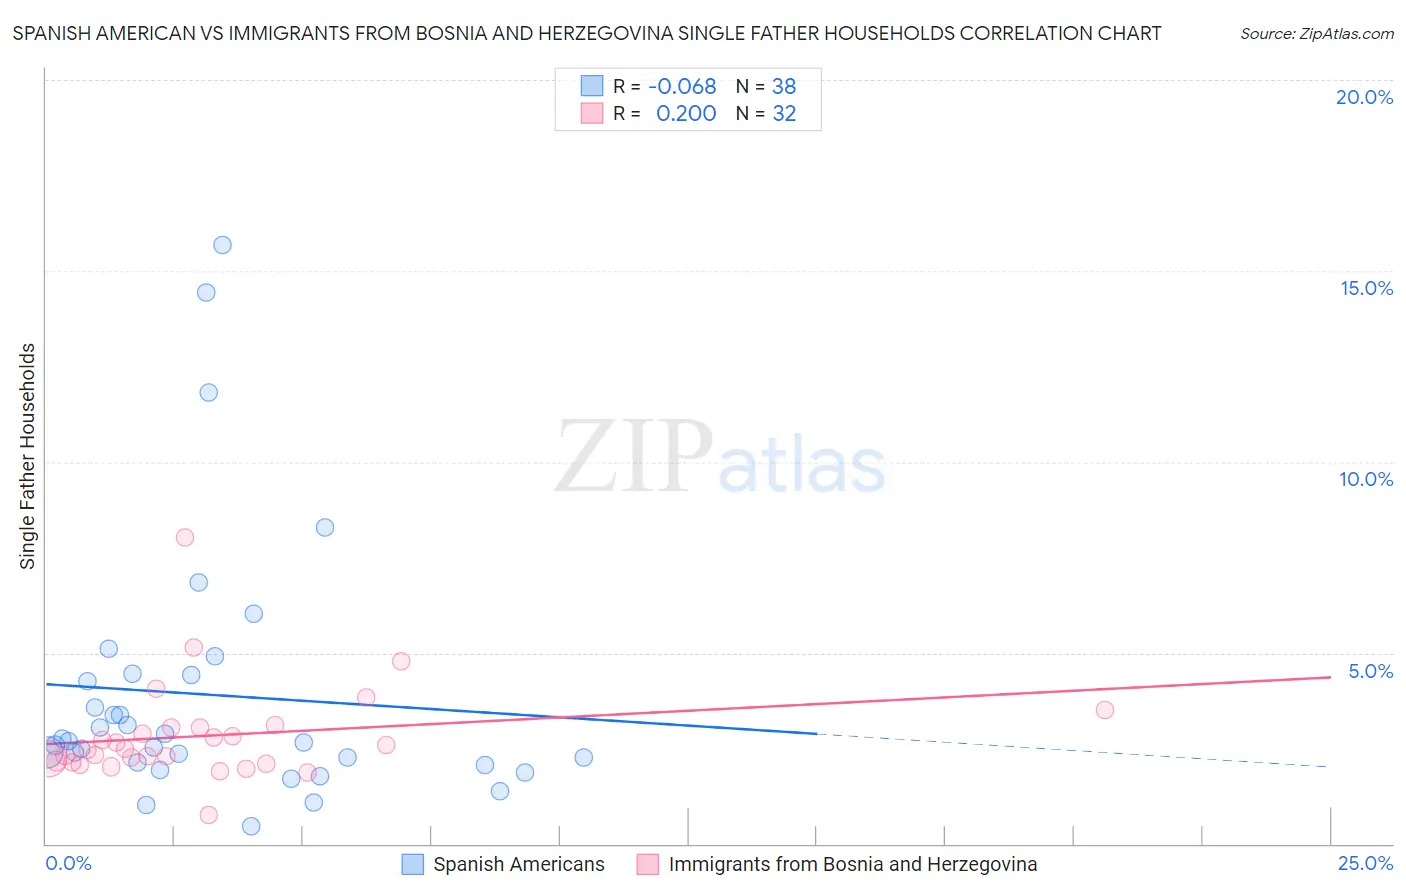 Spanish American vs Immigrants from Bosnia and Herzegovina Single Father Households